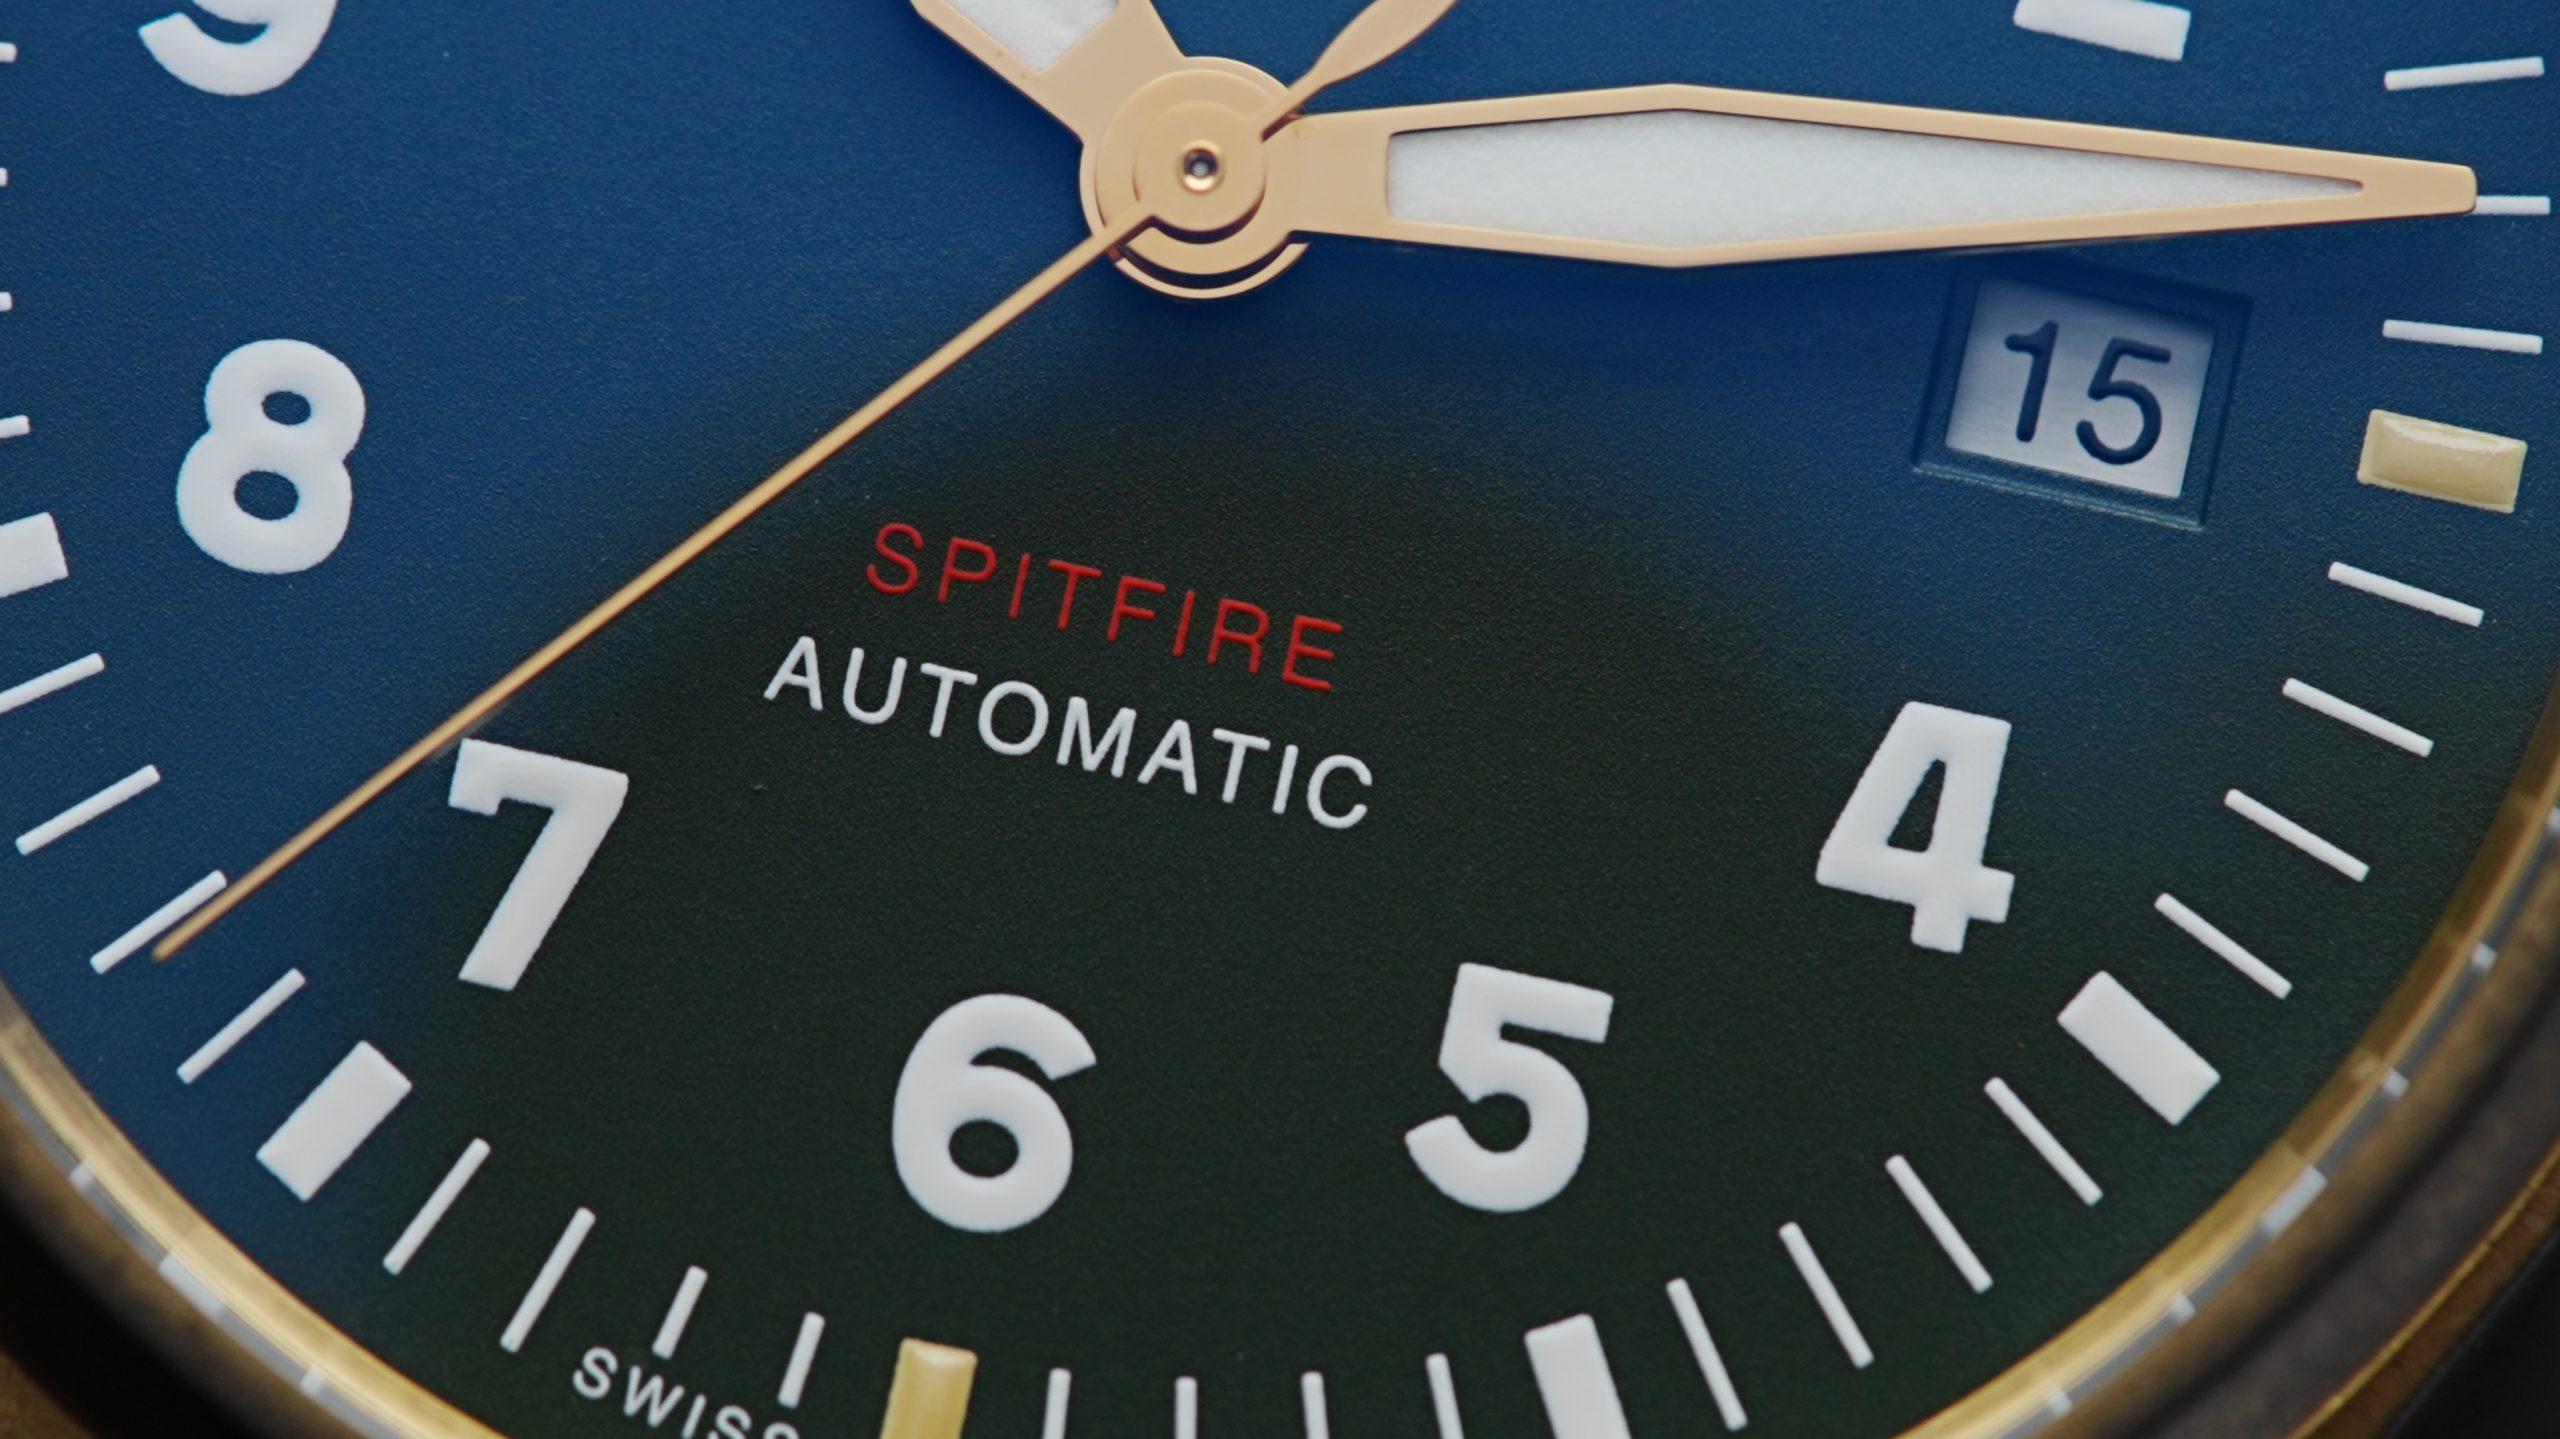 IWC Spitfire Automatic green dial very close up.